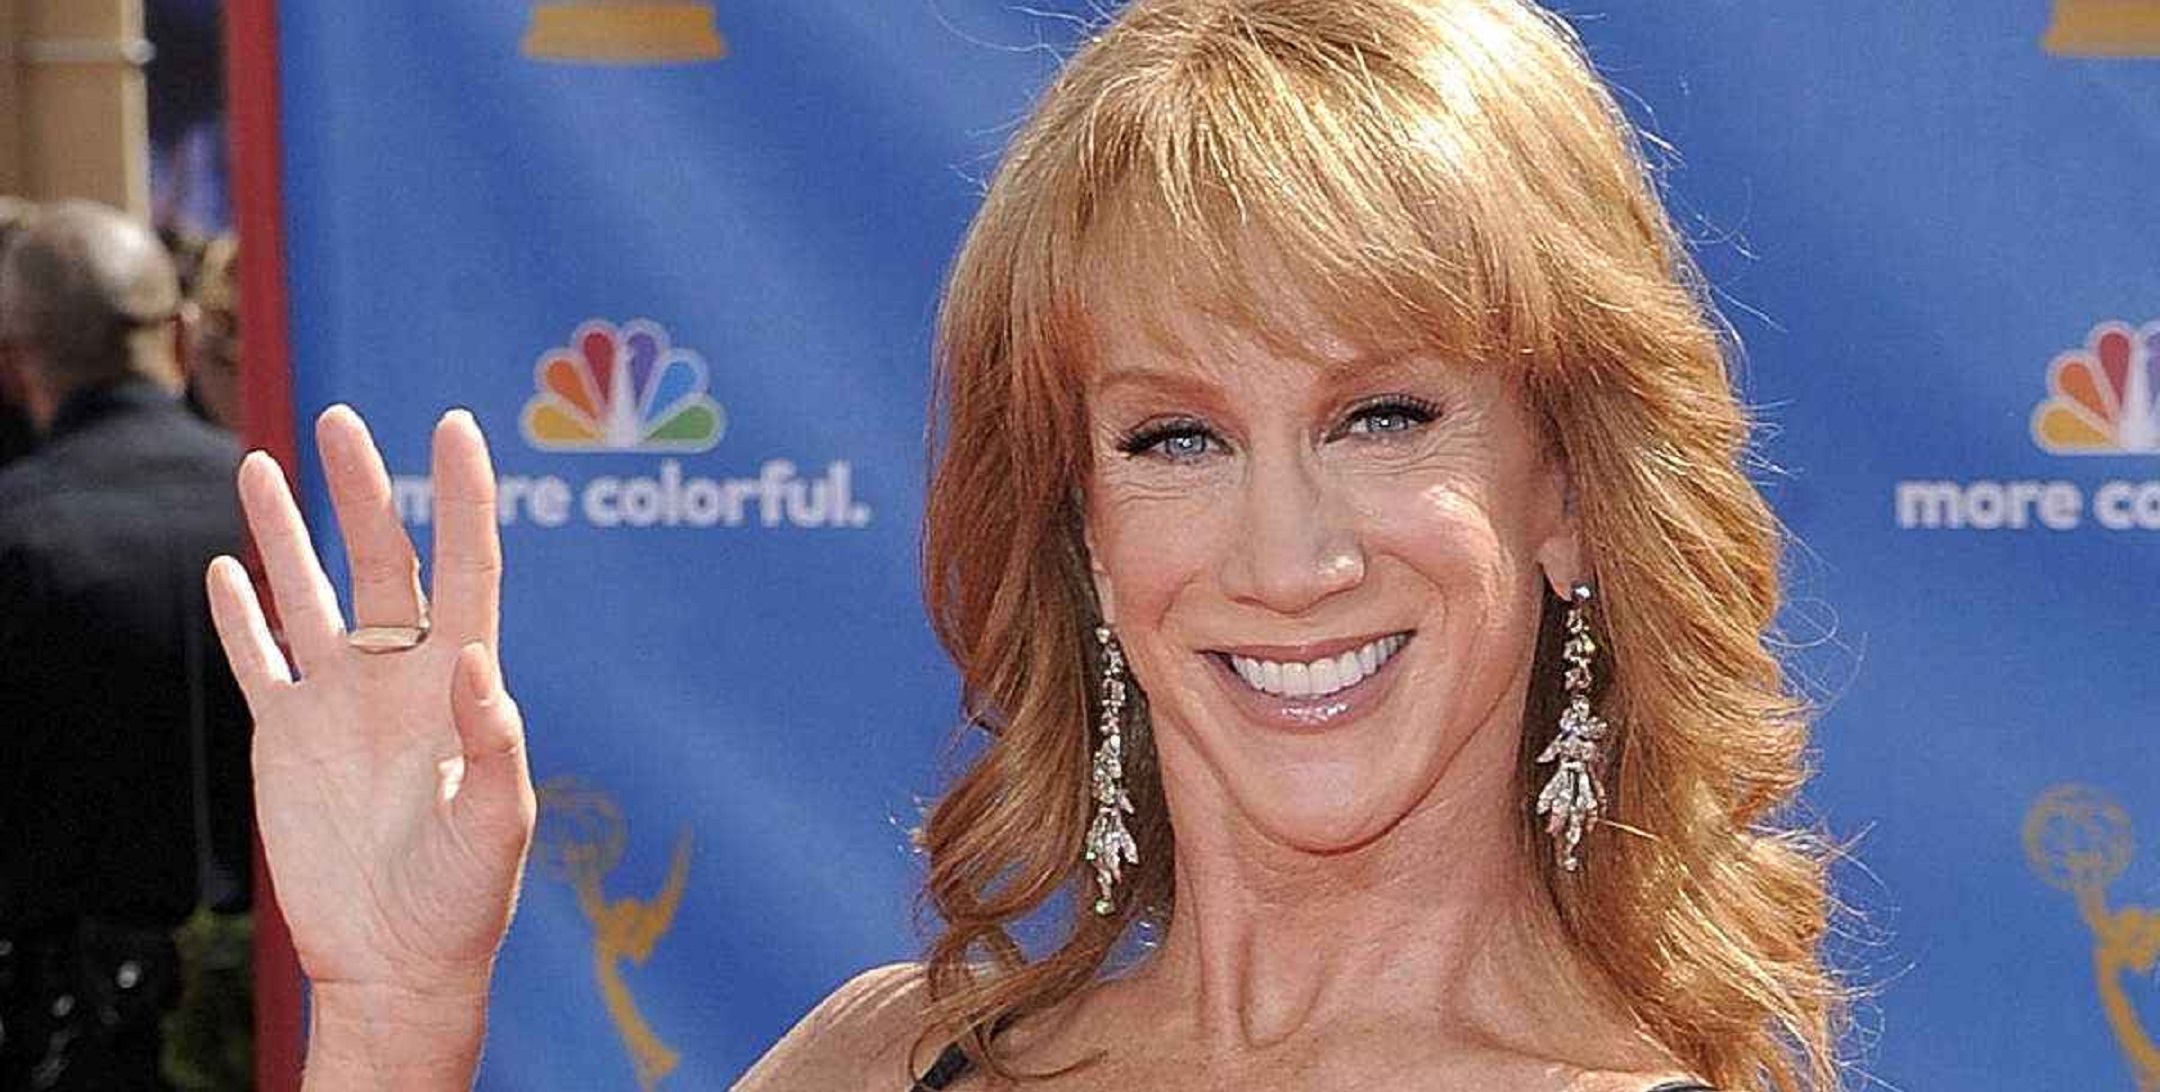 Kathy Griffin Reposts Controversial Photo Of Trump’s Severed Head on Her 60th Birthday